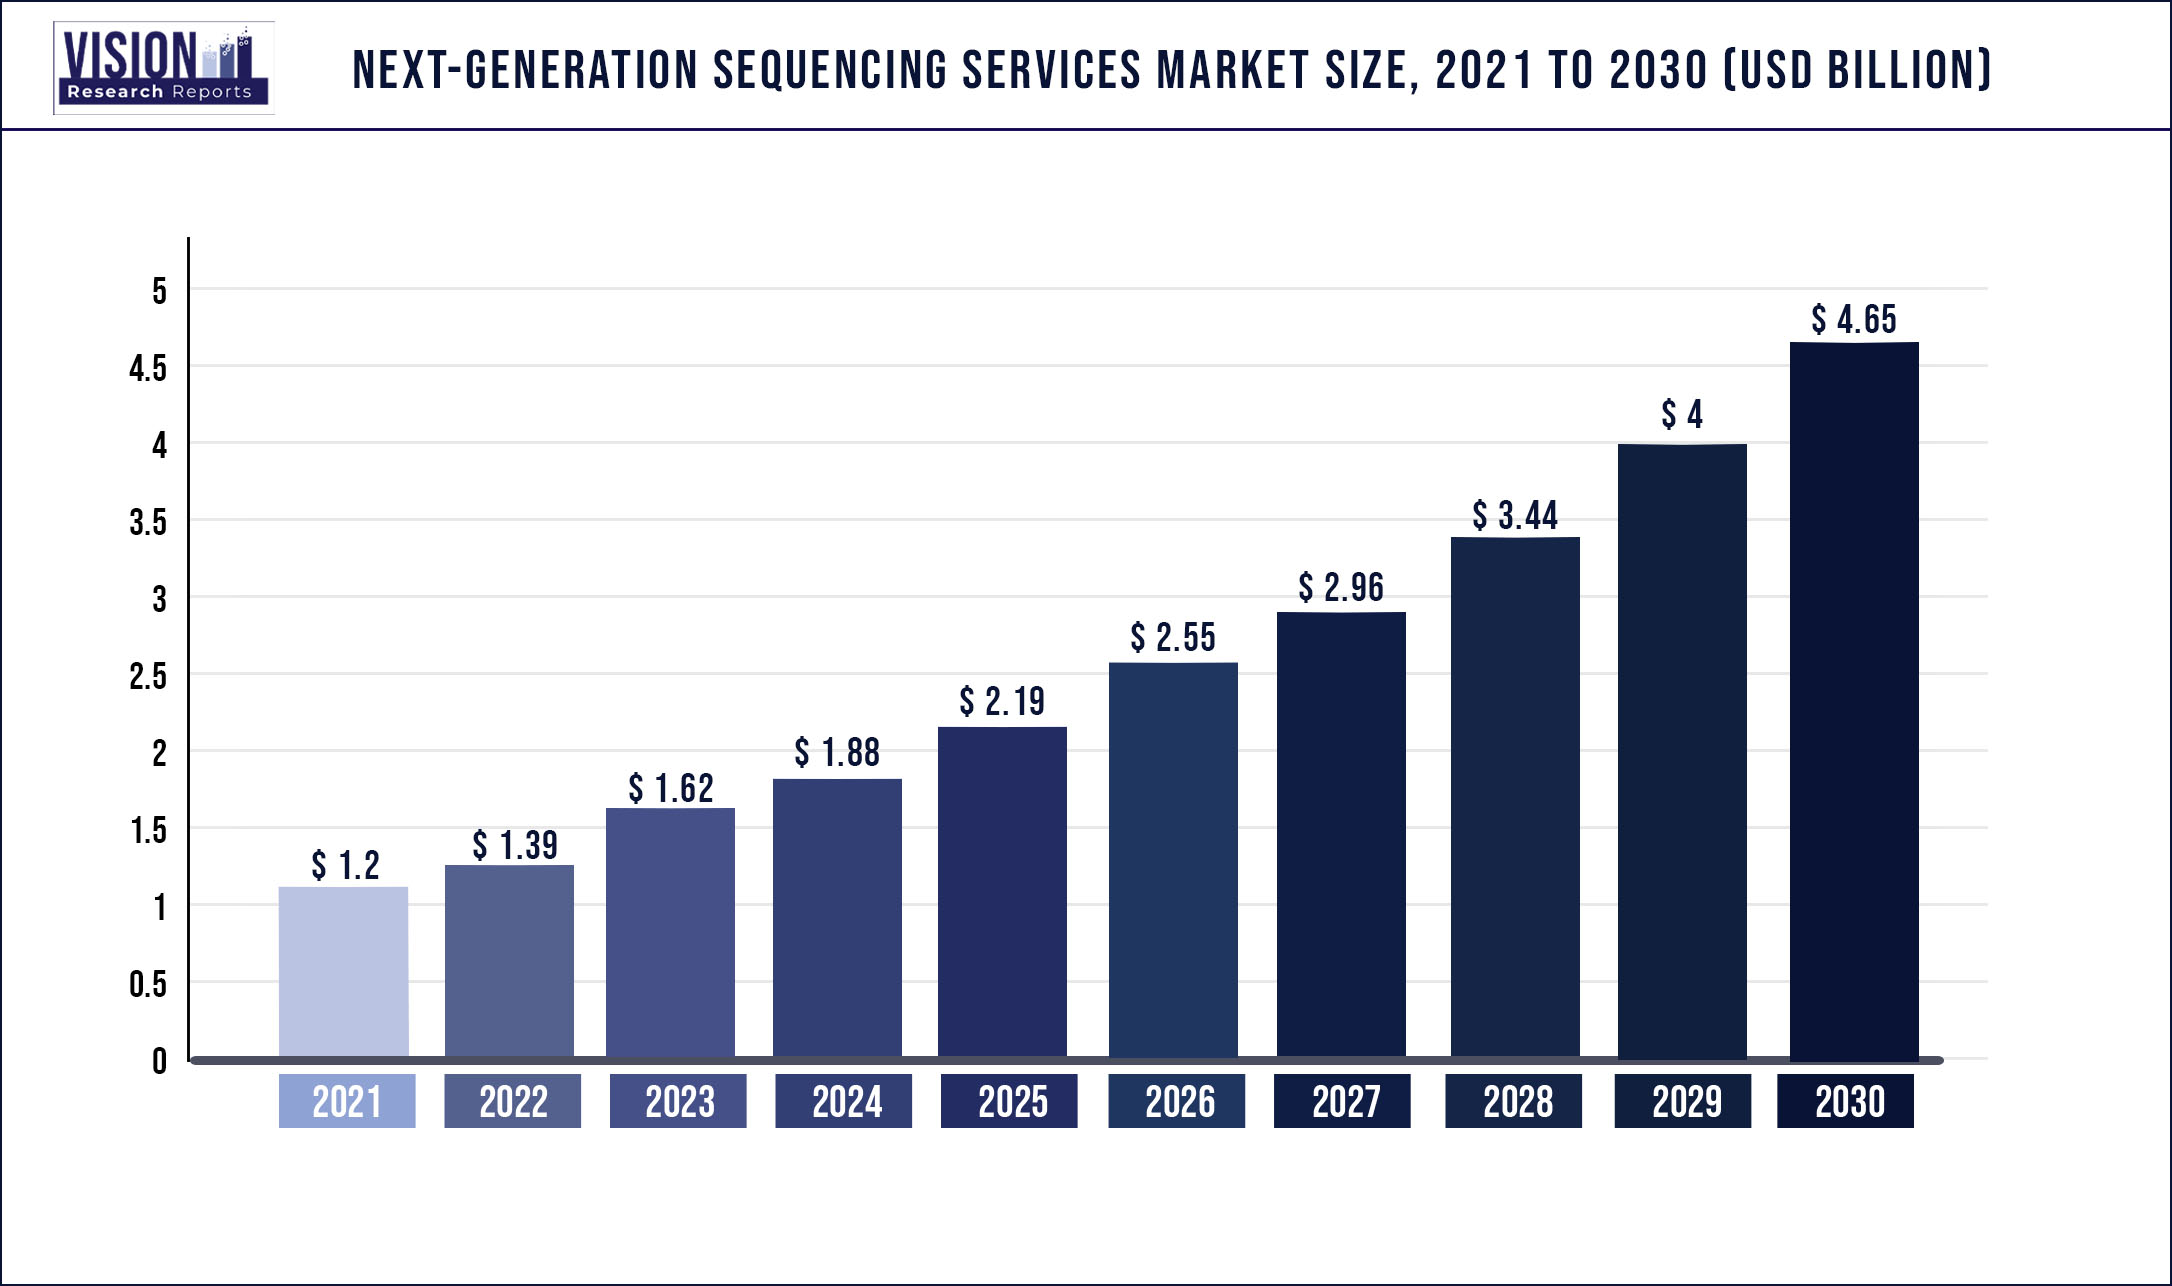 Next Generation Sequencing Services Market Size 2021 to 2030